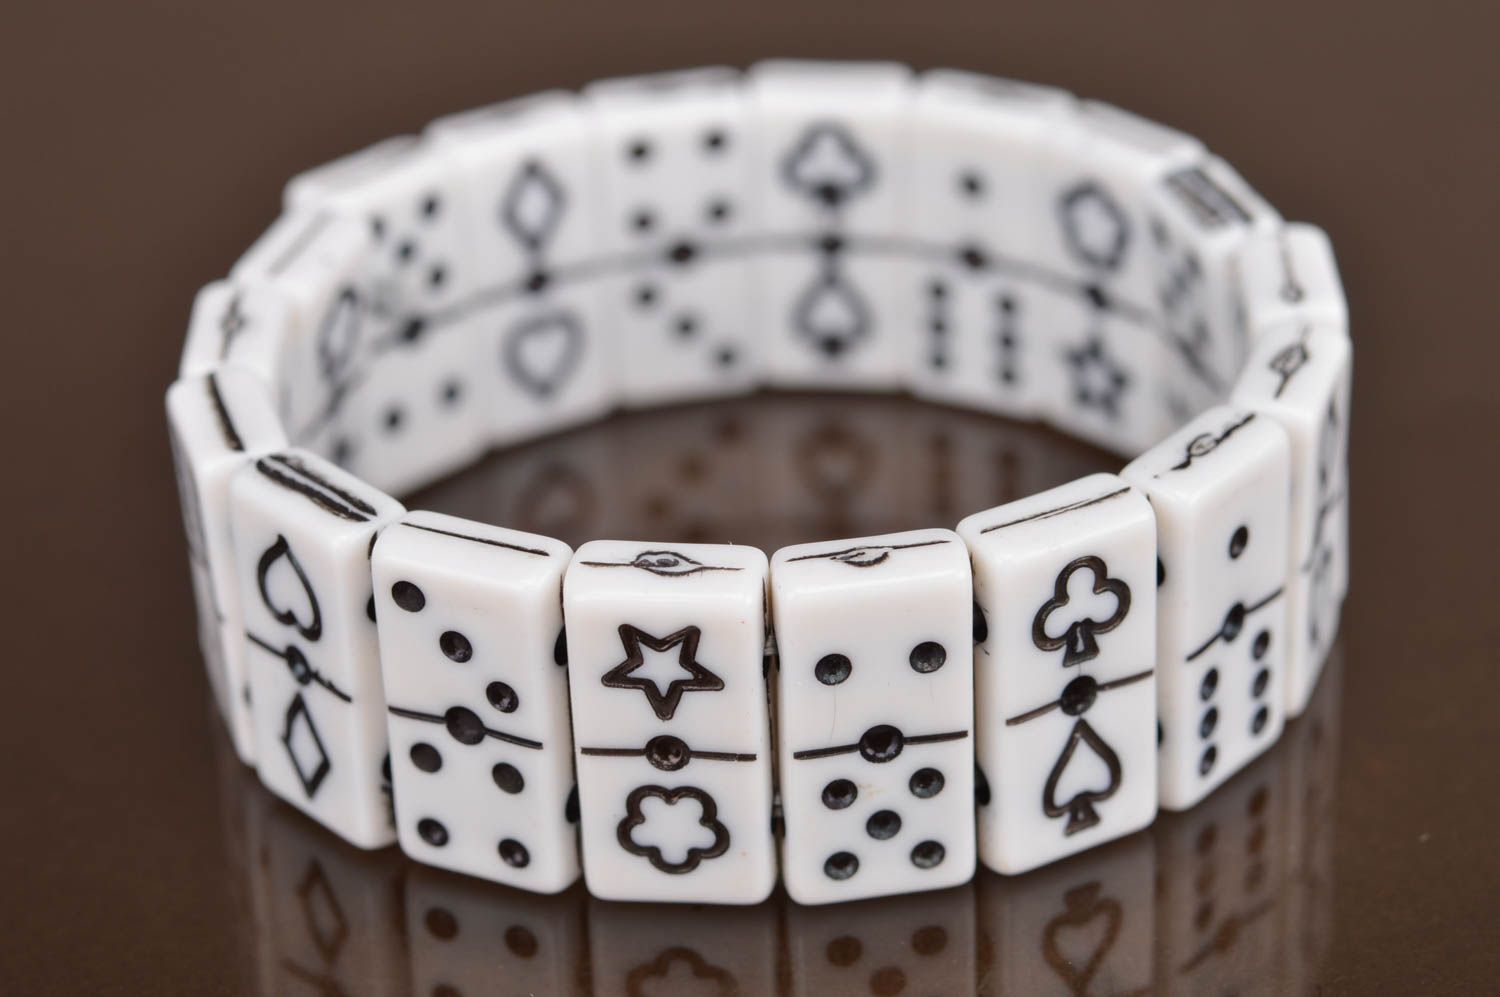 Black and white bracelet made of flat beads in shape of dominoes counters photo 5